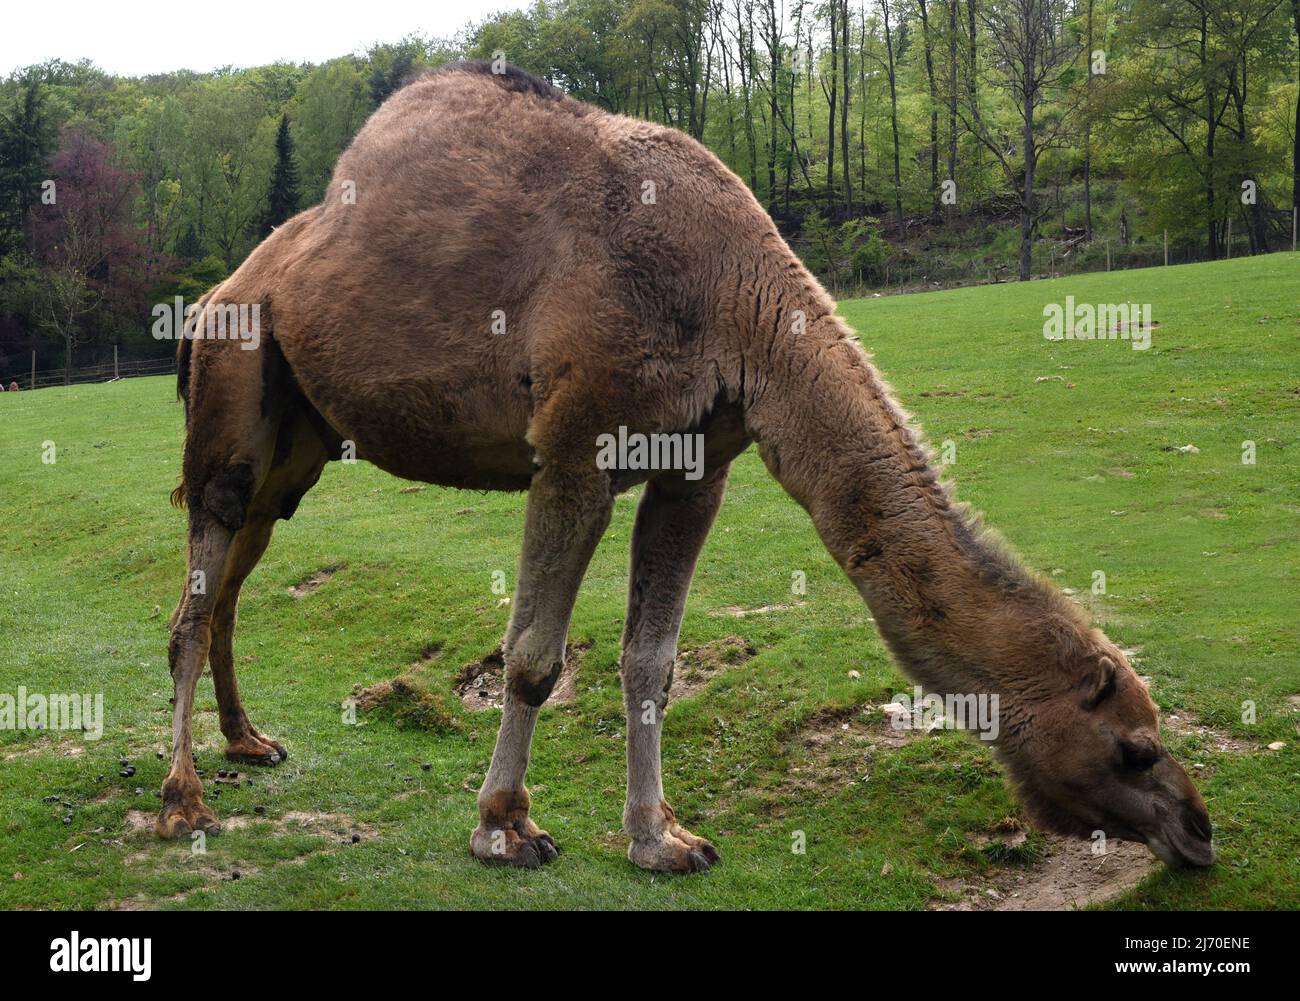 The dromedary, Camelus dromedarius, also known as the one-humped or Arabian camel, is a species of mammal from the genus Old World camels. Stock Photo